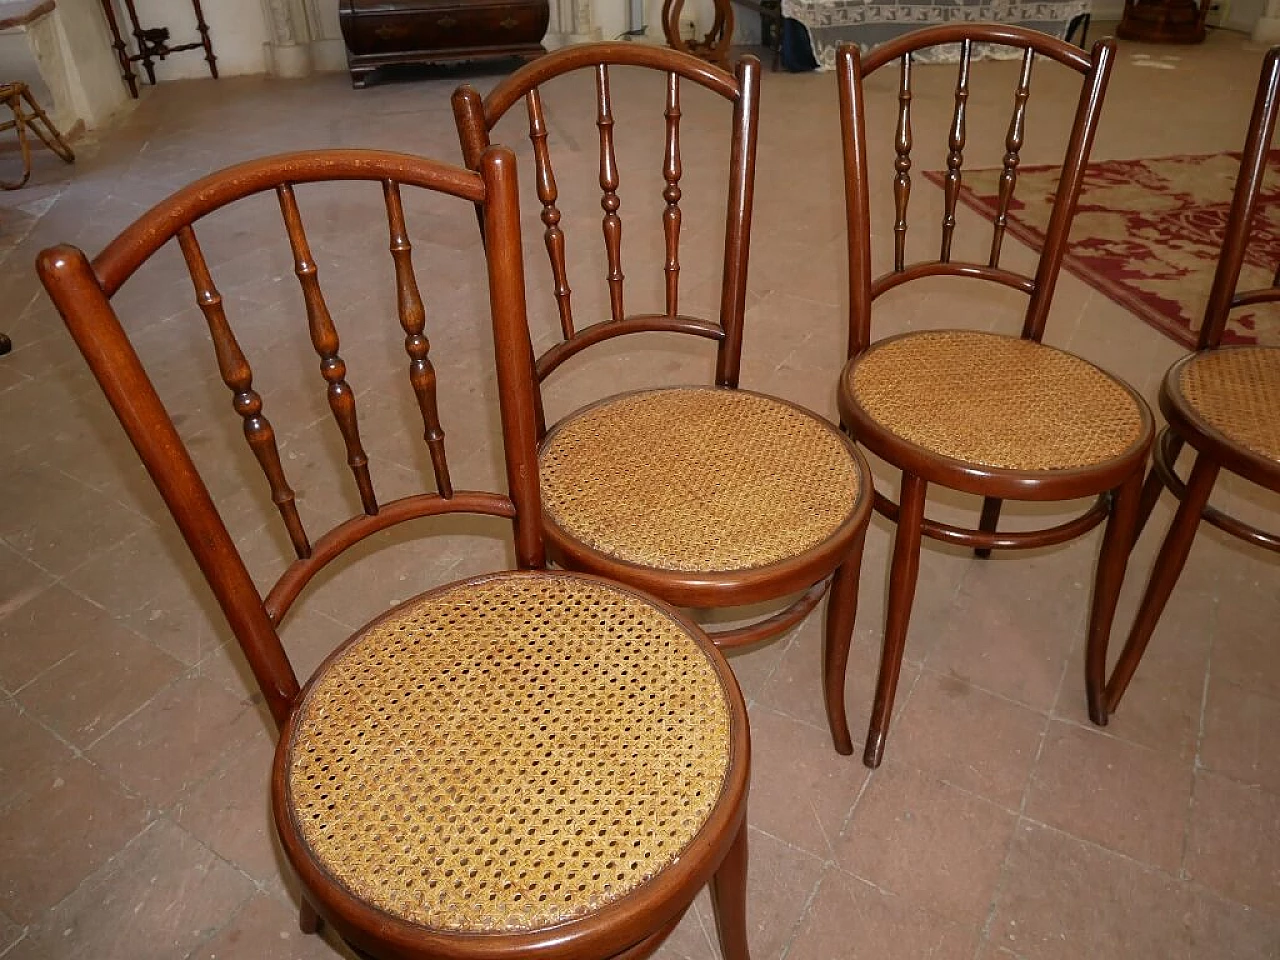 Series of 4 chairs marked with the brand J & J Kohn Wien Austria, beginning 20th century 1324148